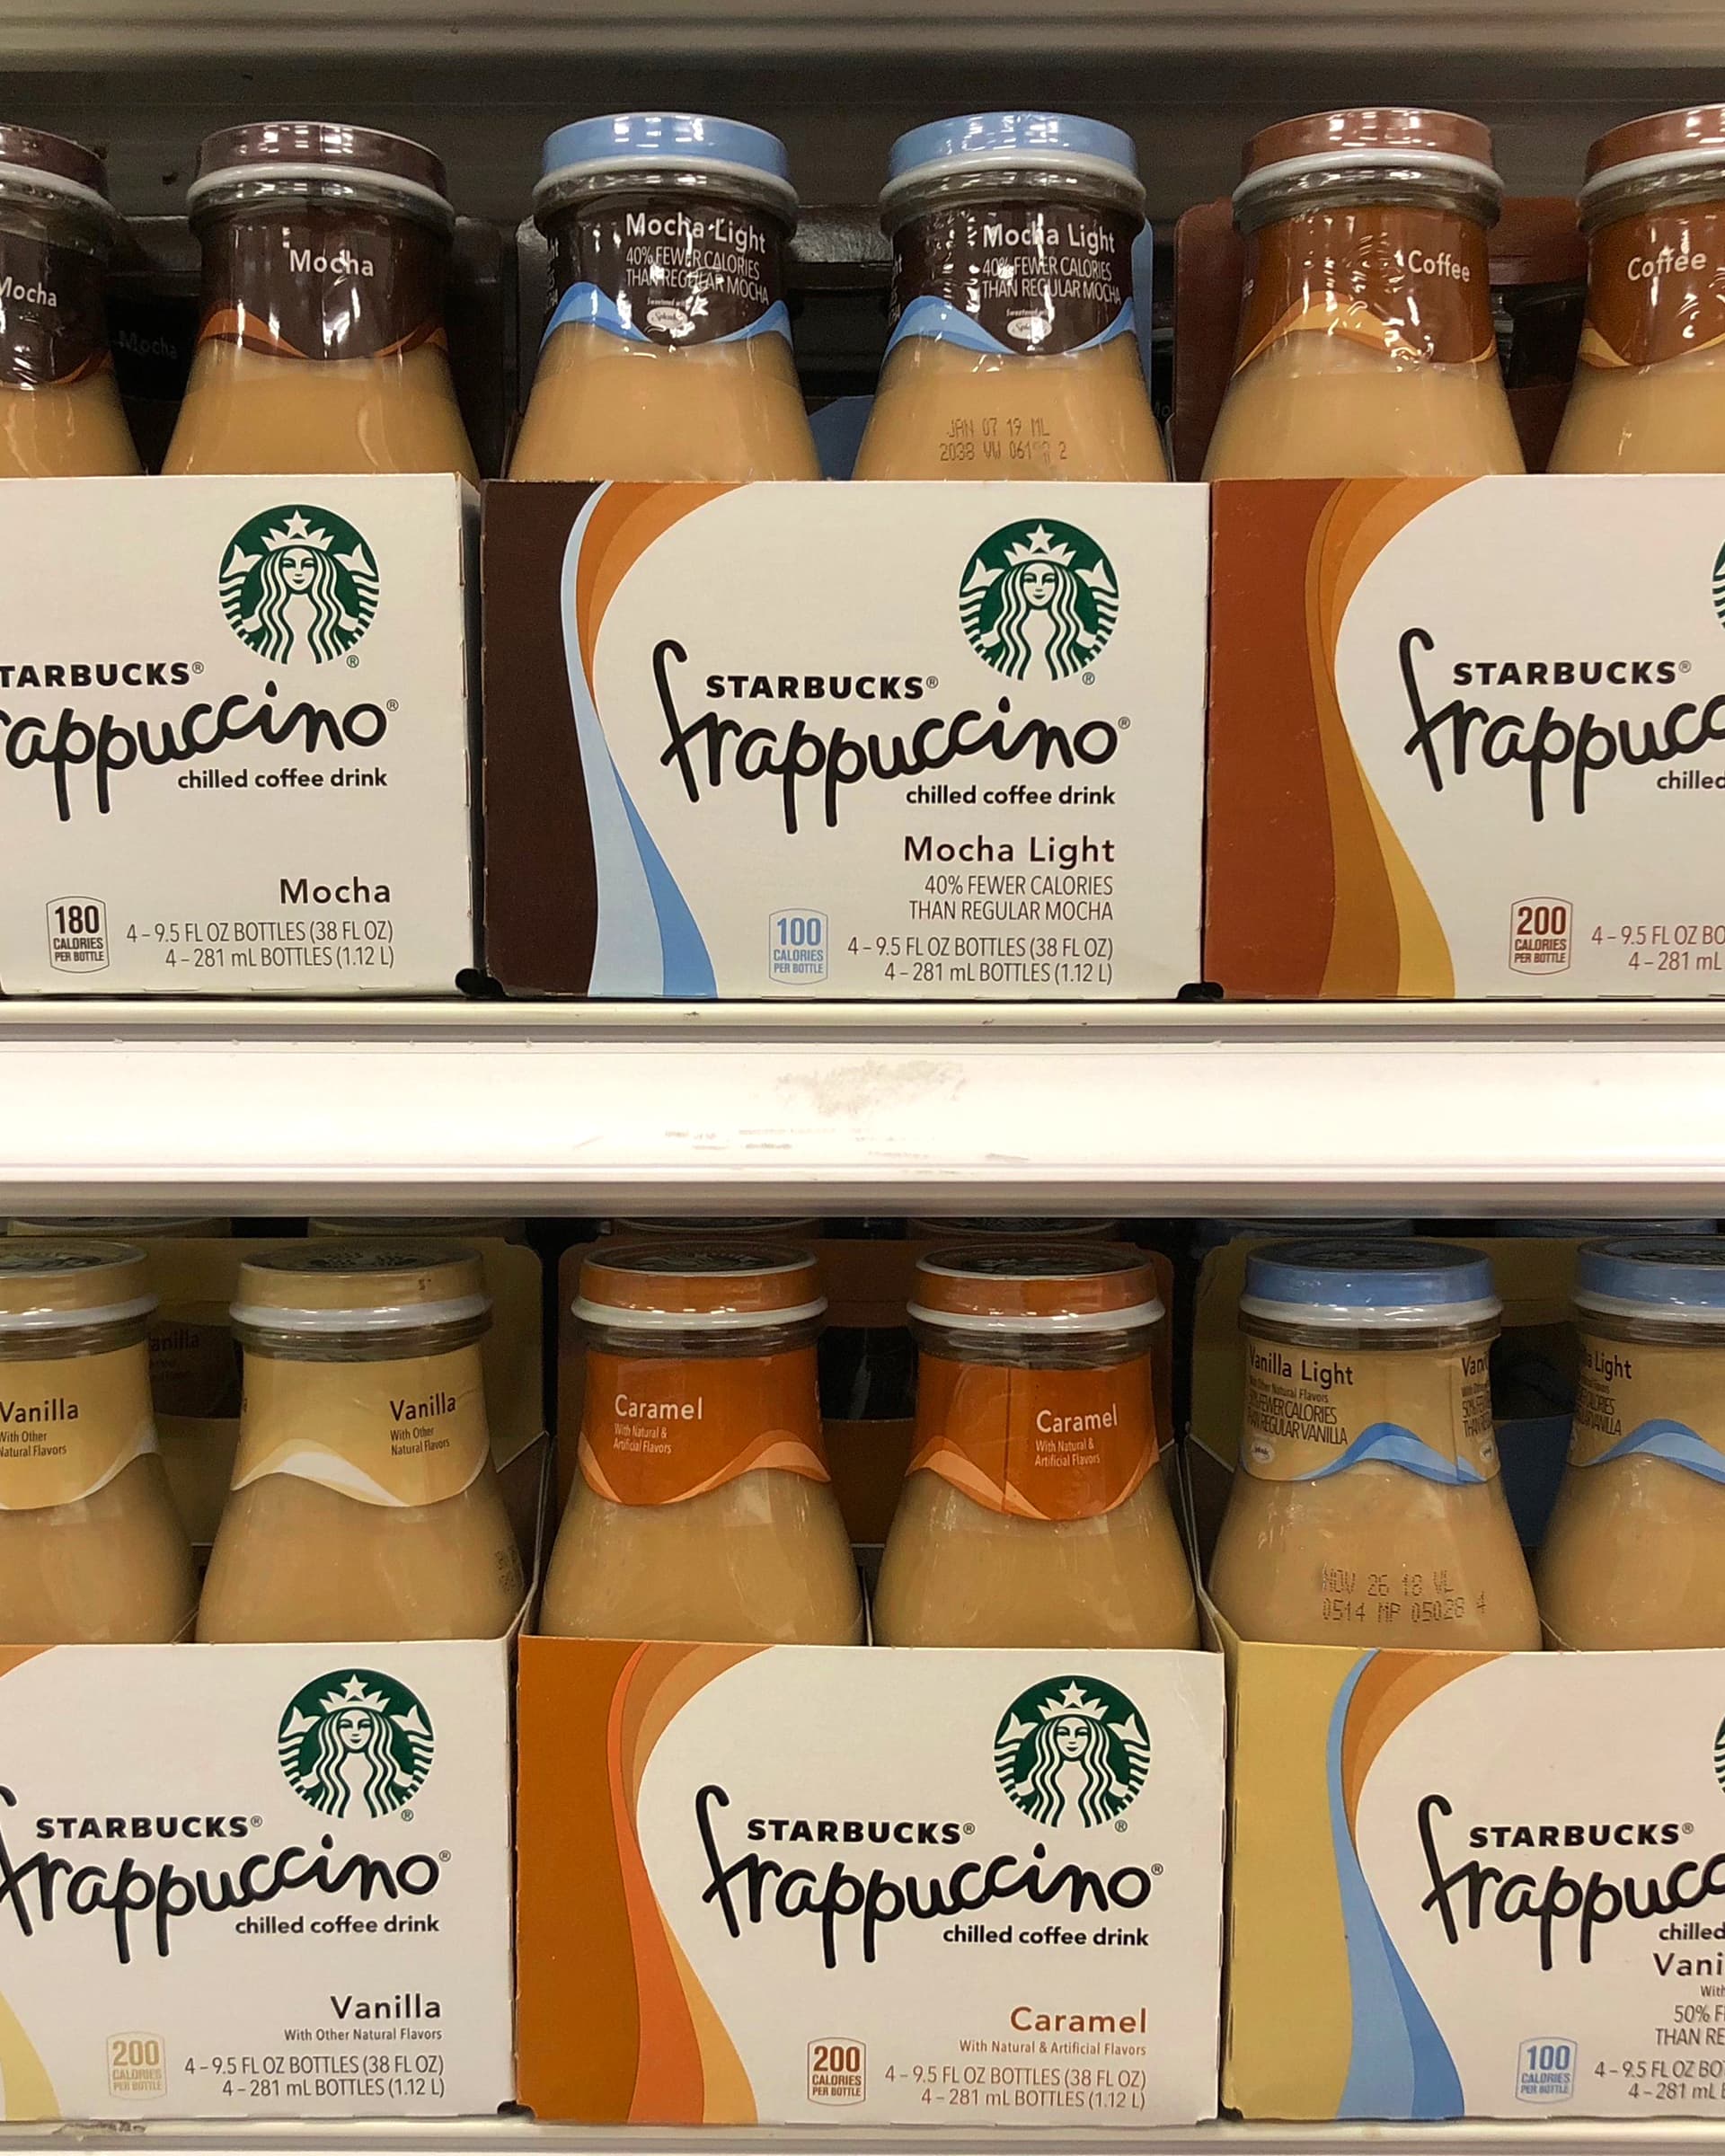 Over 300,000 Starbucks Bottled Frappuccino Drinks Have Been Recalled